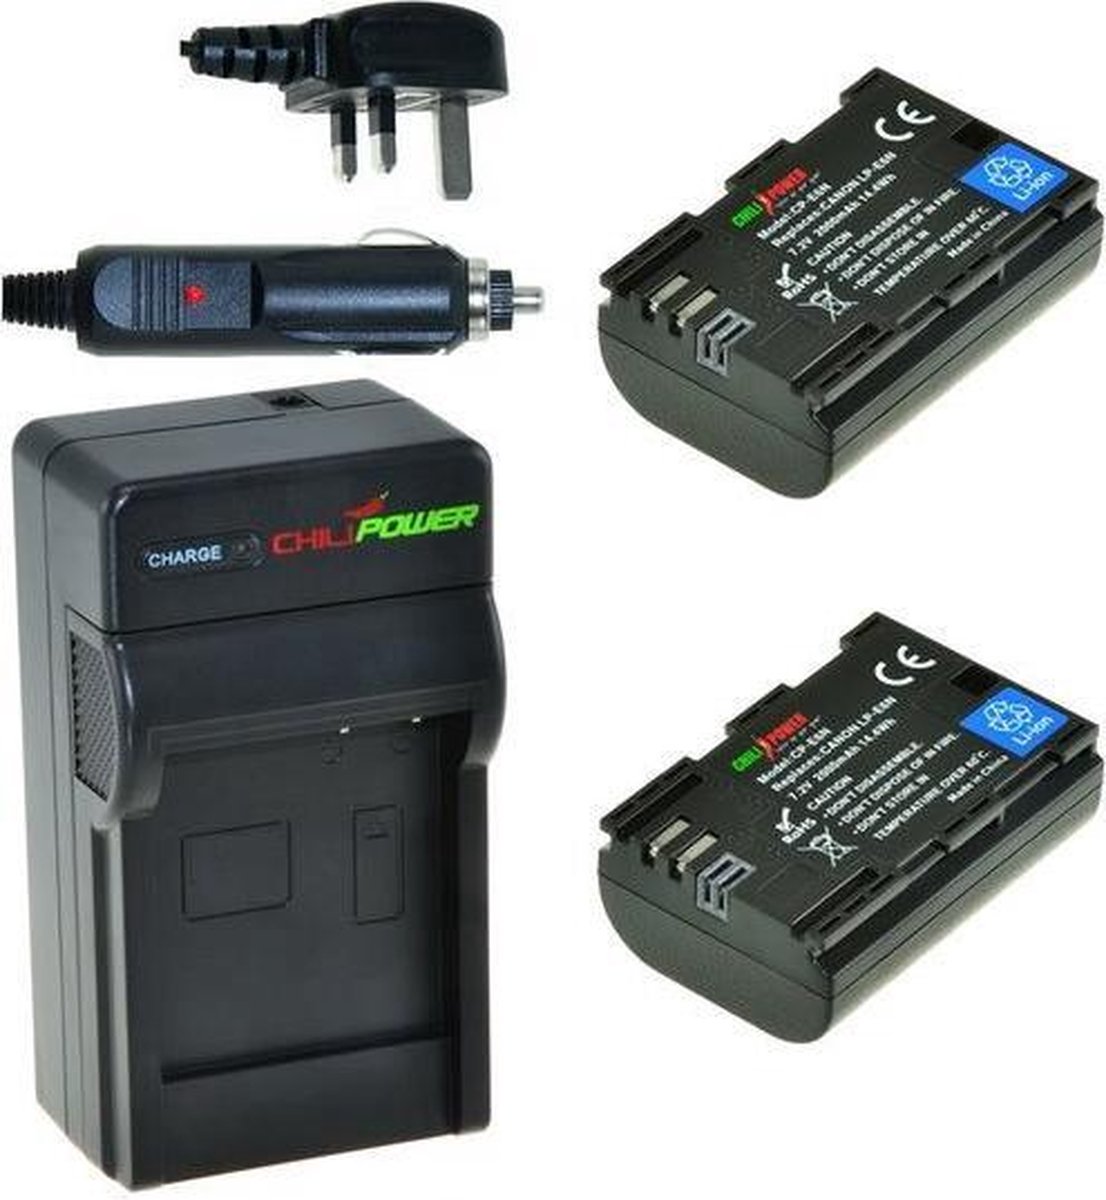 ChiliPower 2 x LP-E6N accu's voor Canon - Charger Kit + car-charger - UK version